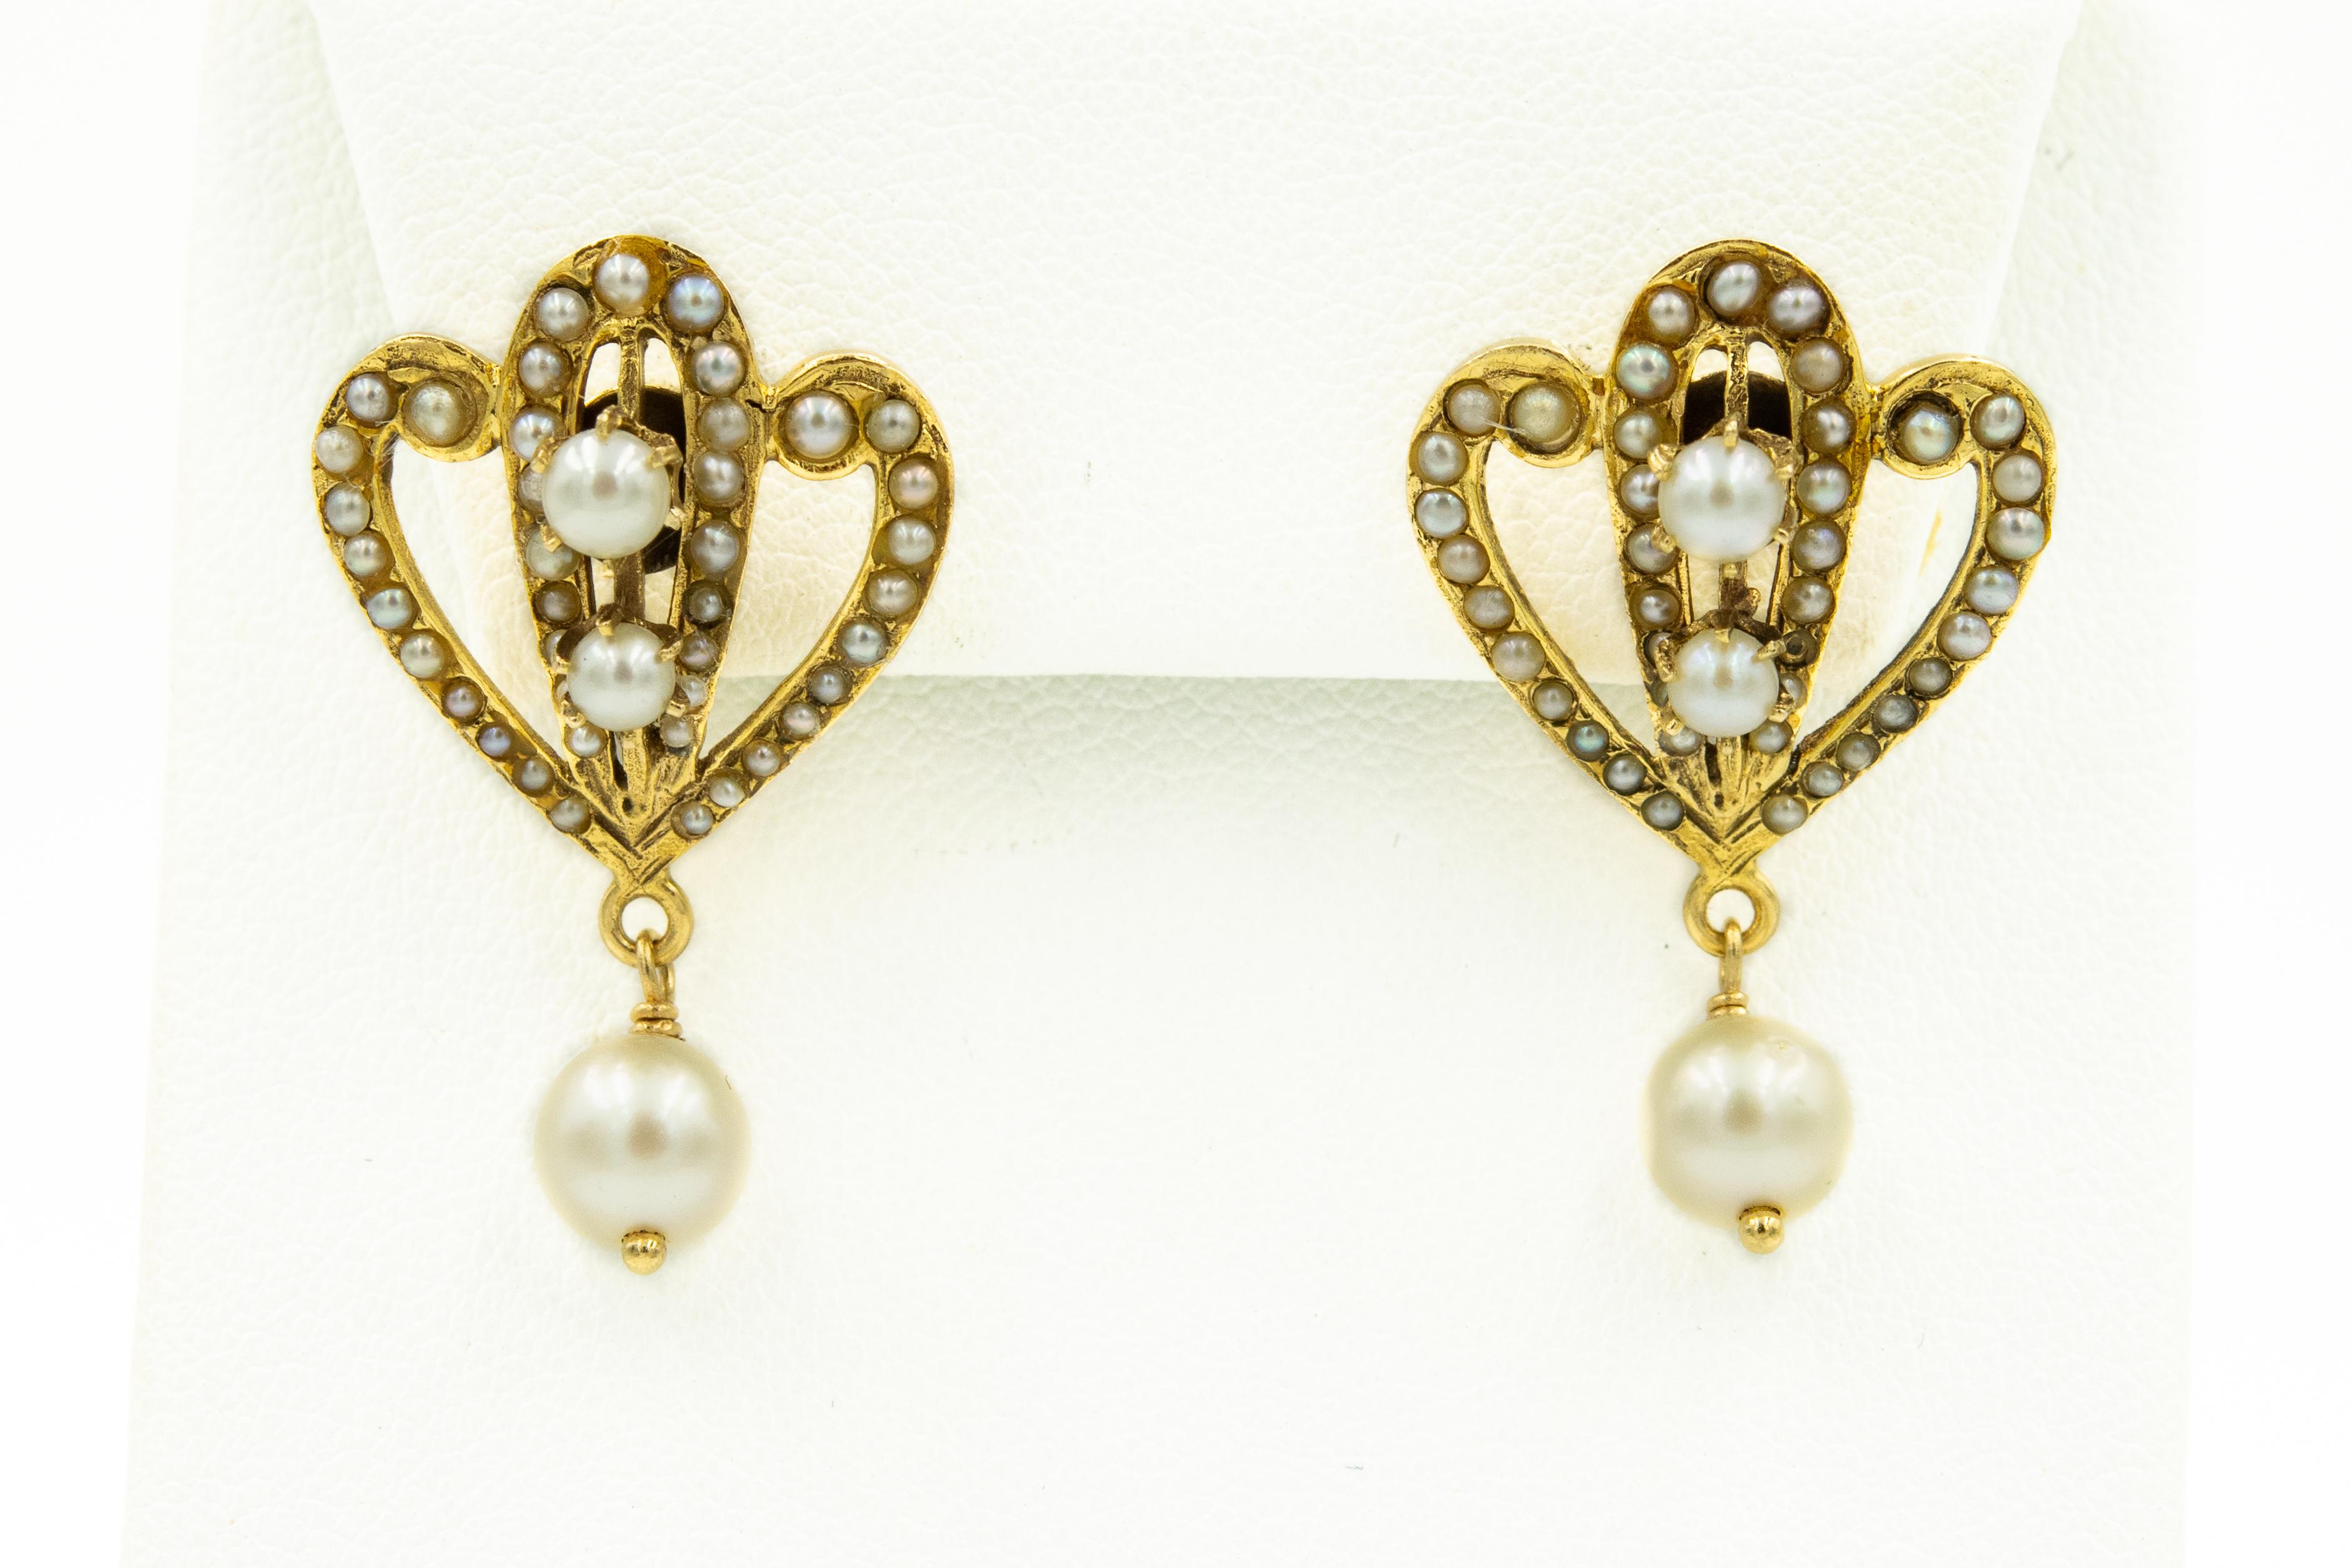 Victorian Style Garland Ribbon Pearl Yellow Gold Brooch Pin Pendant and Earrings In Good Condition For Sale In Miami Beach, FL